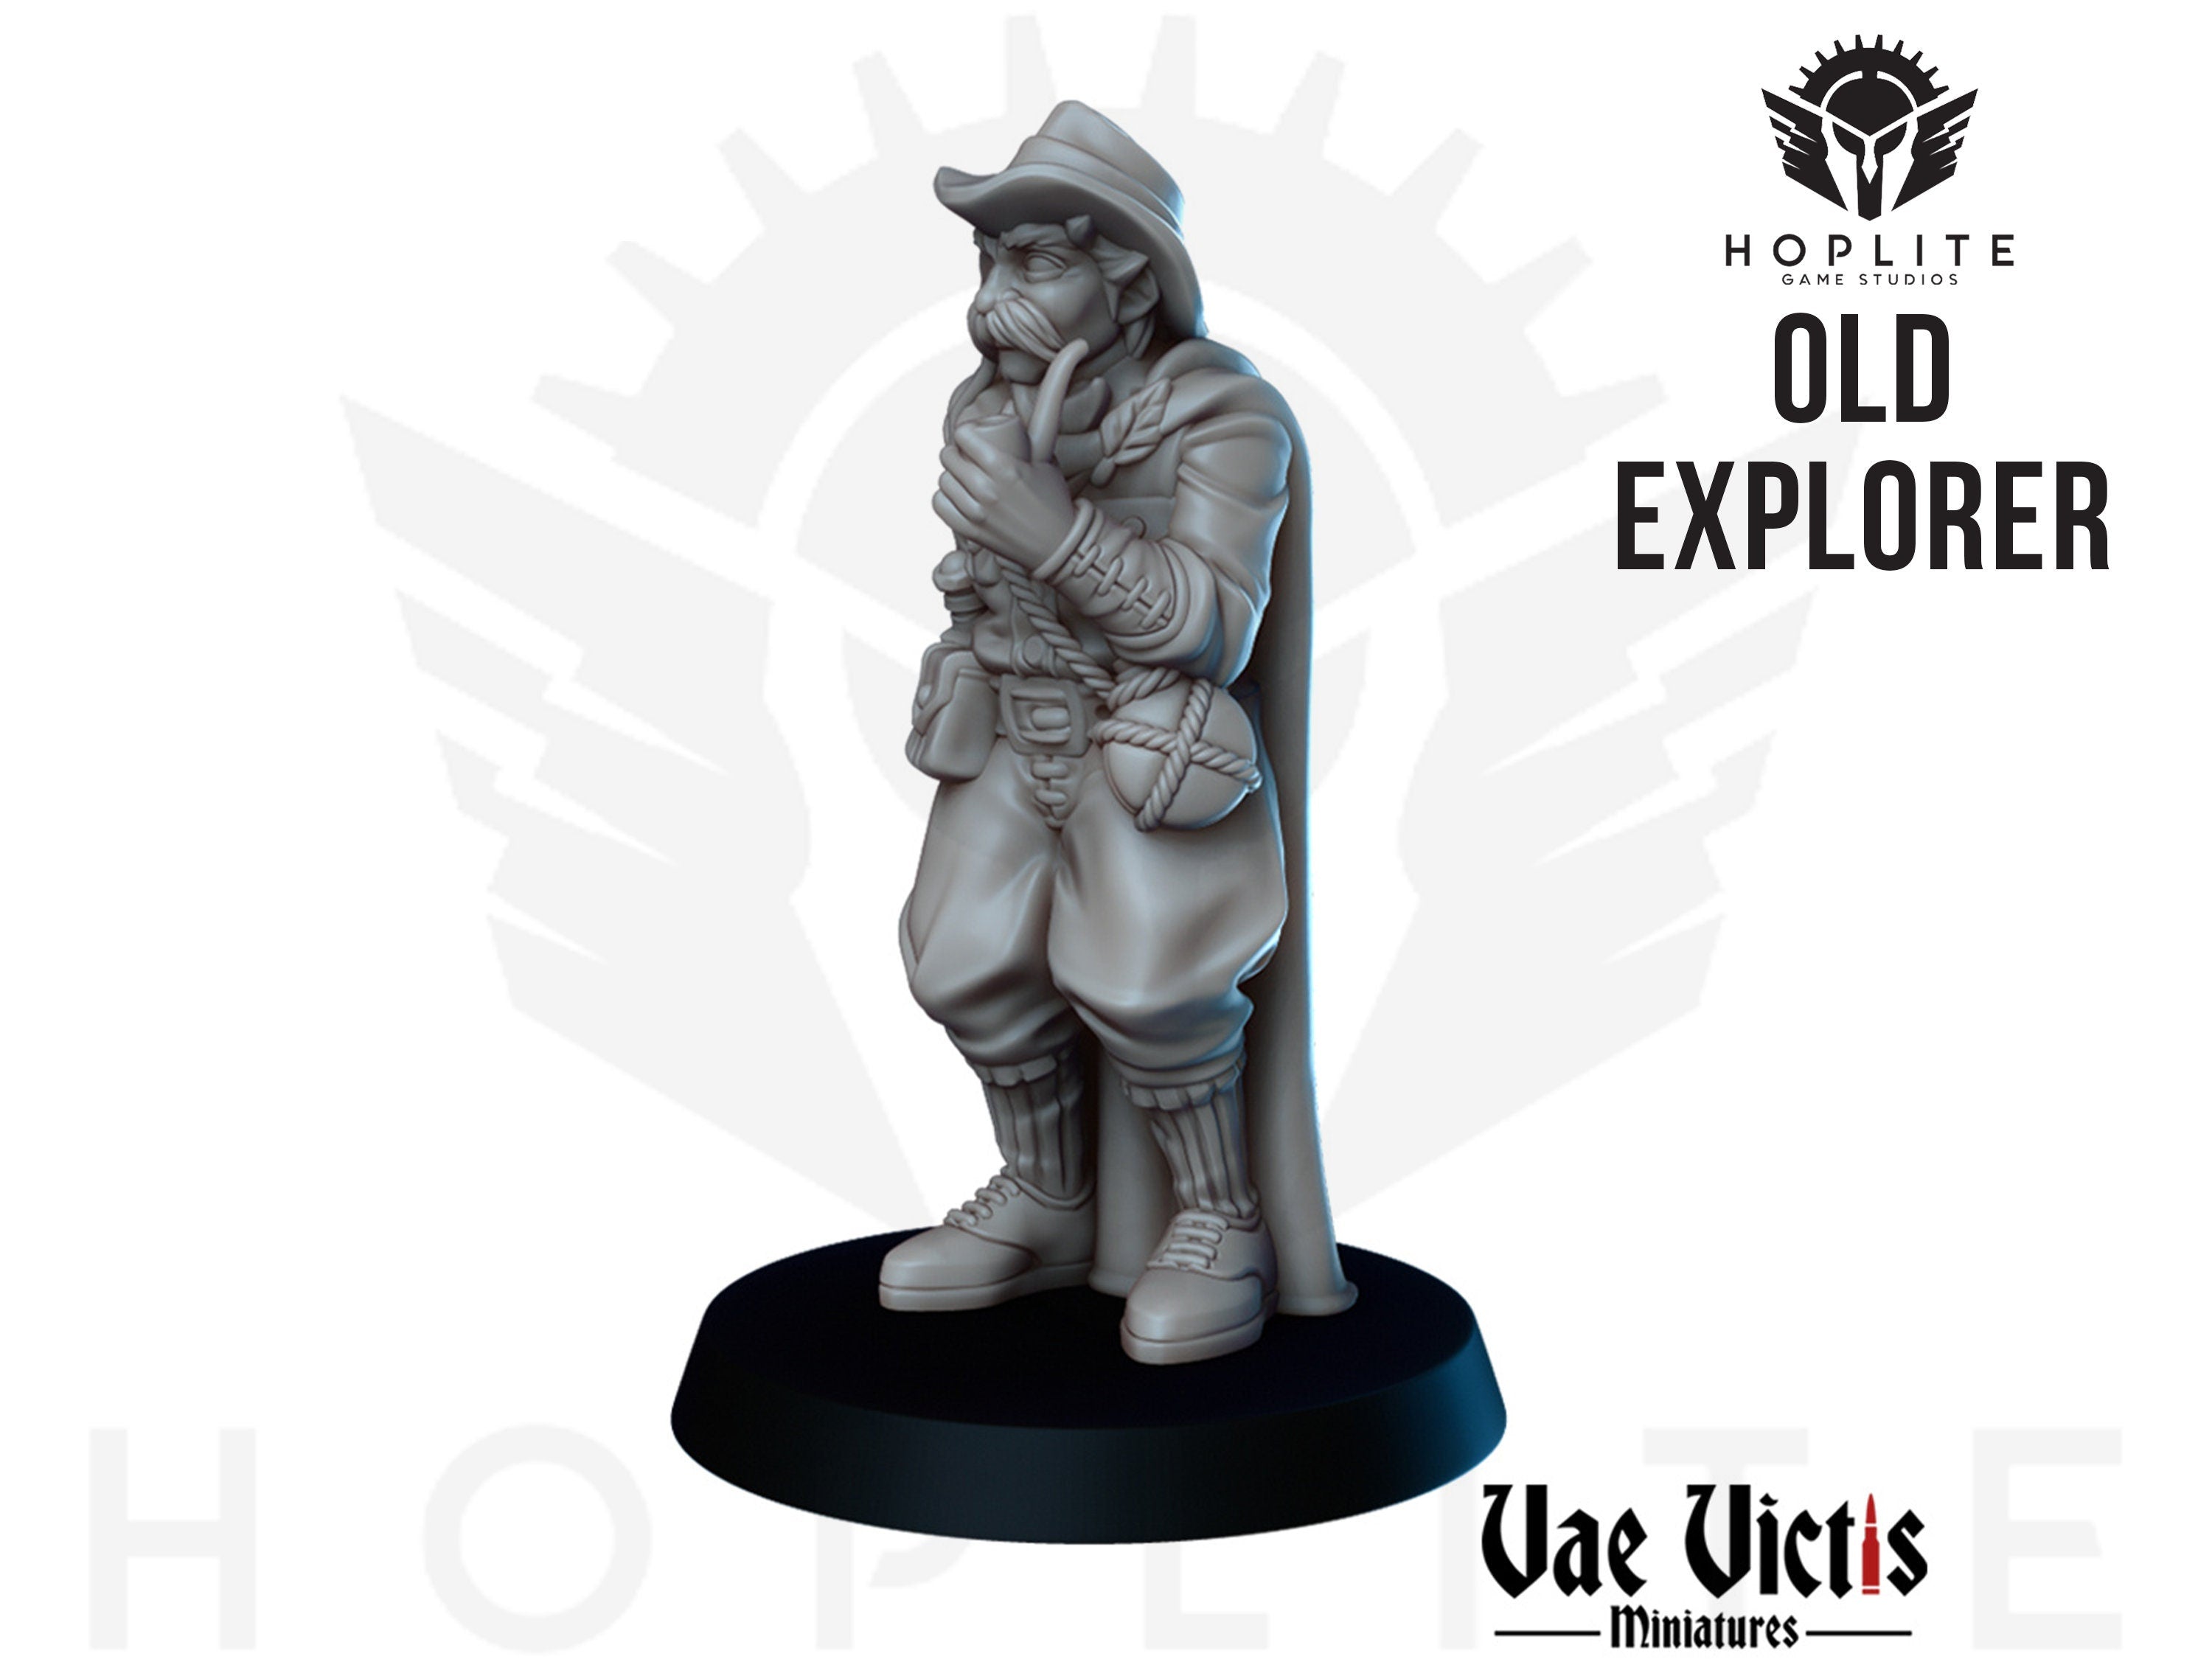 The Old Explorer